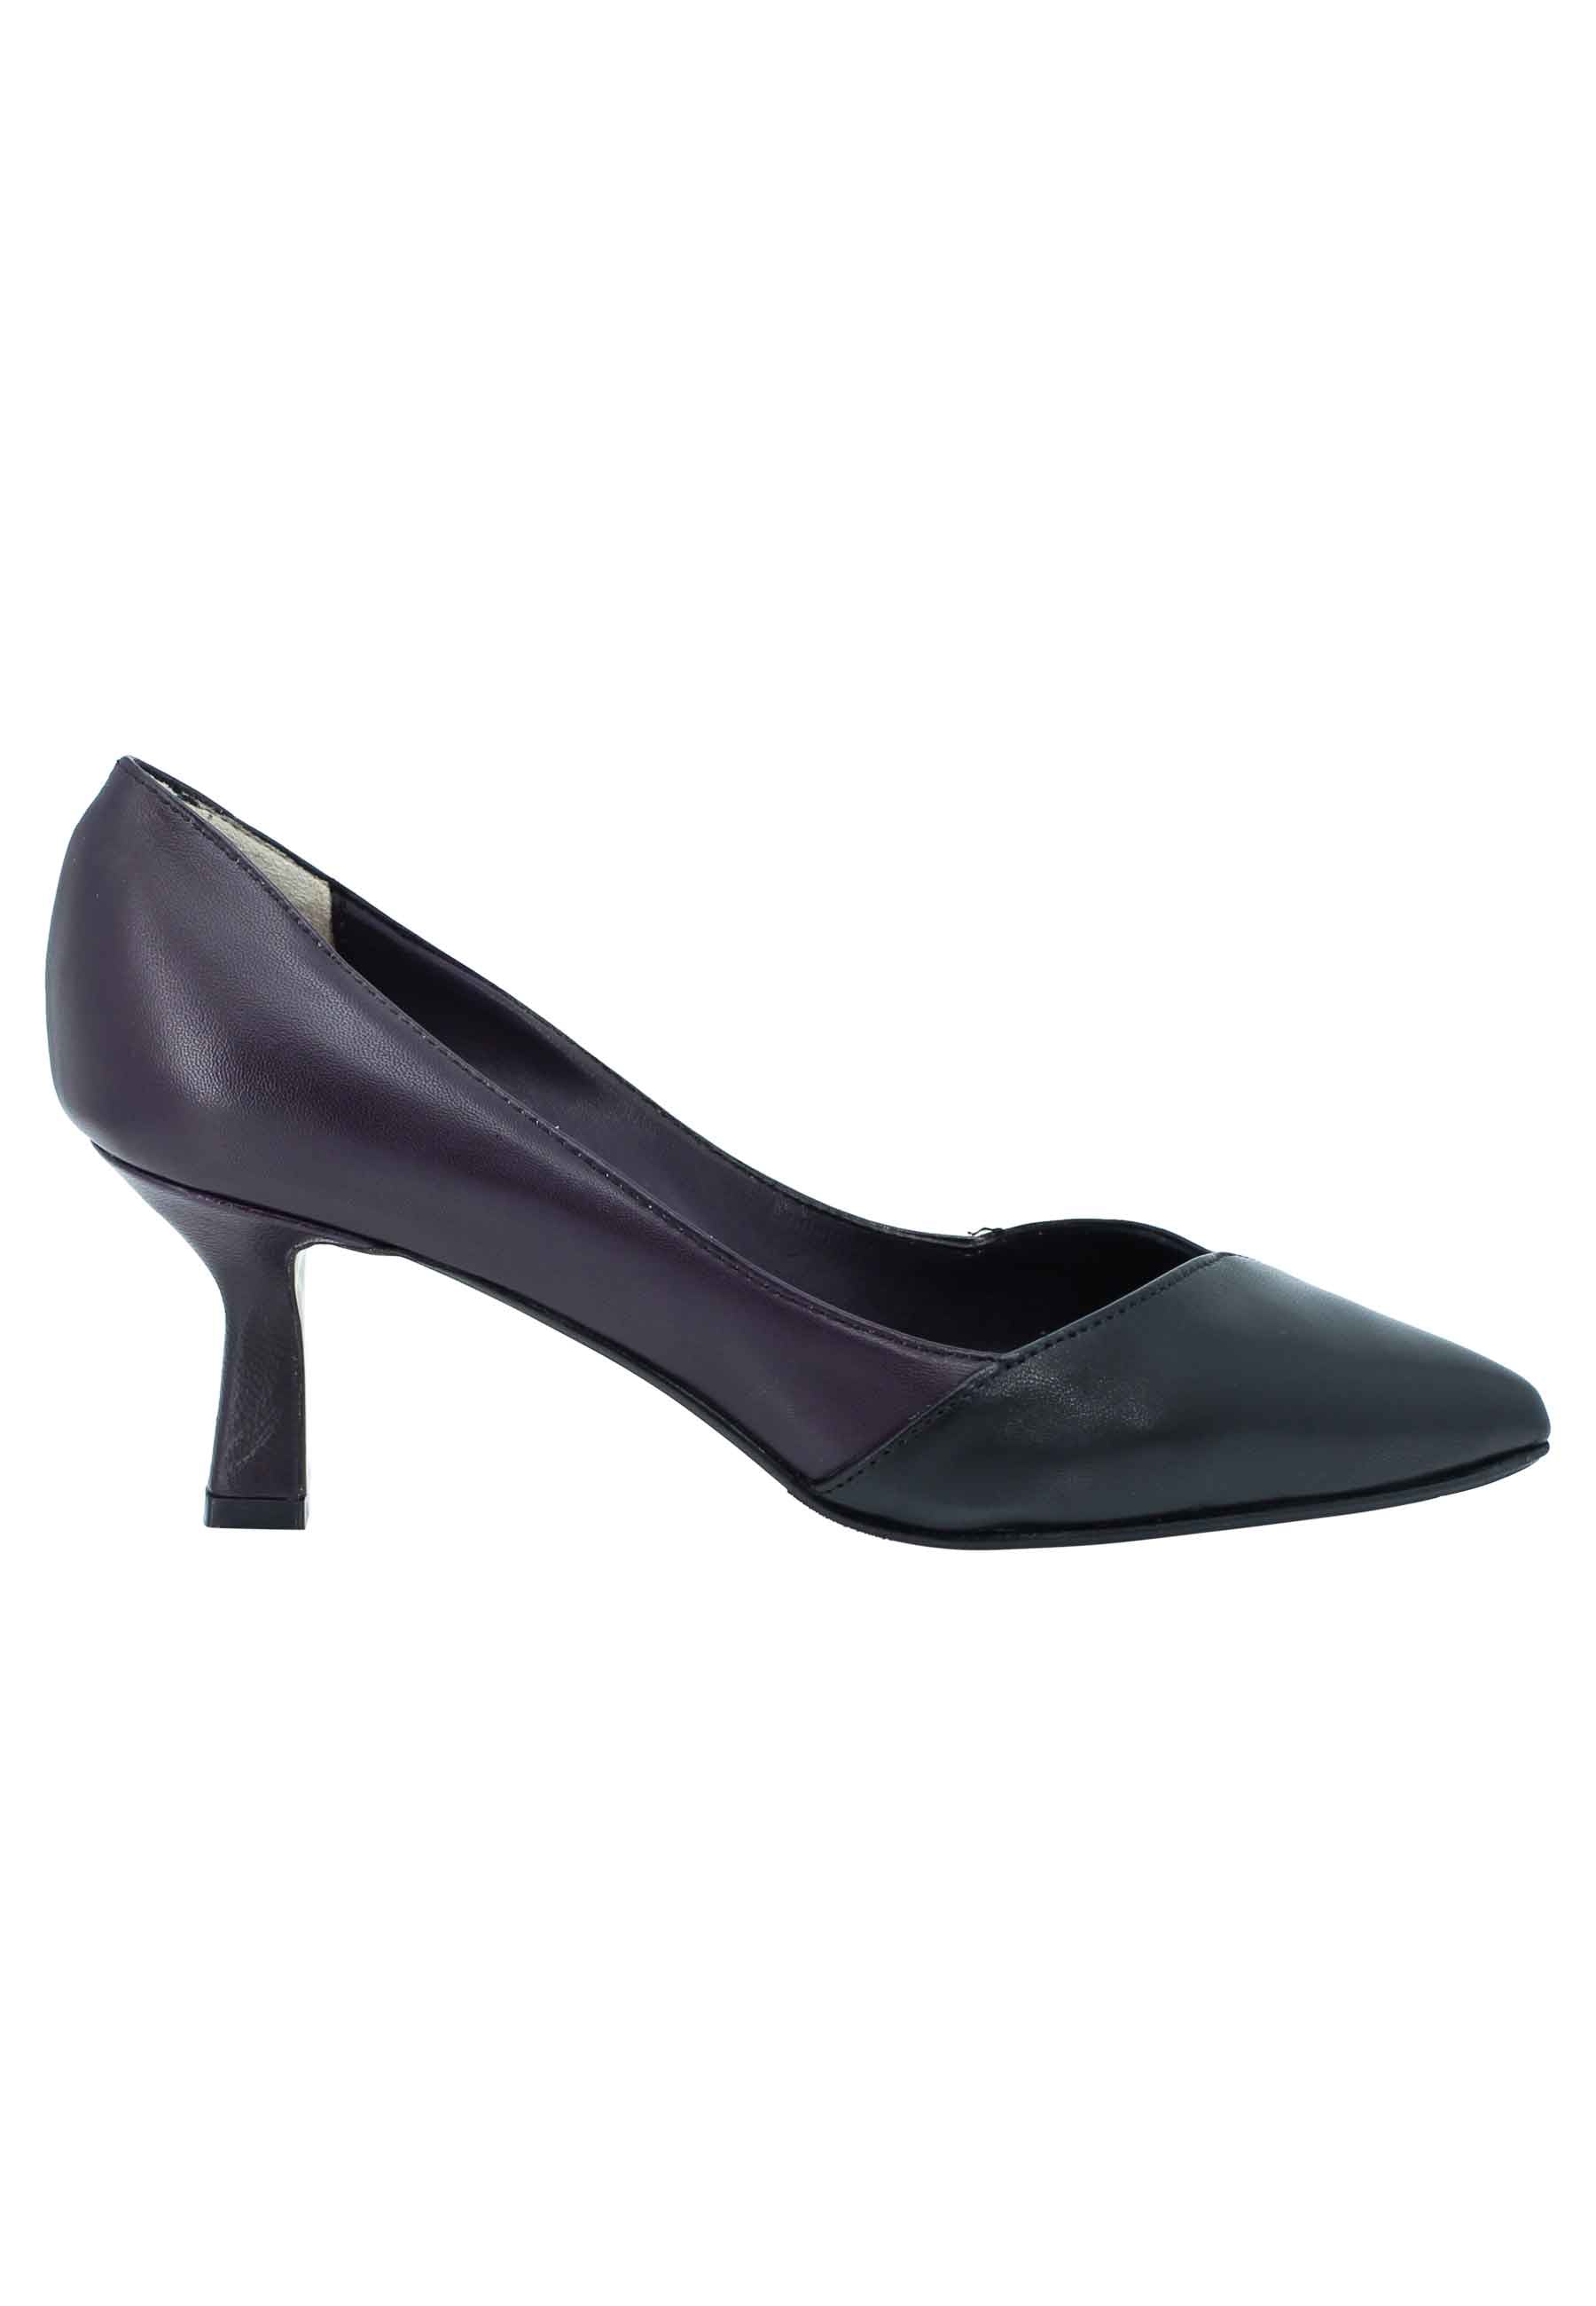 Women's decollete in two-tone black and purple leather with low heel